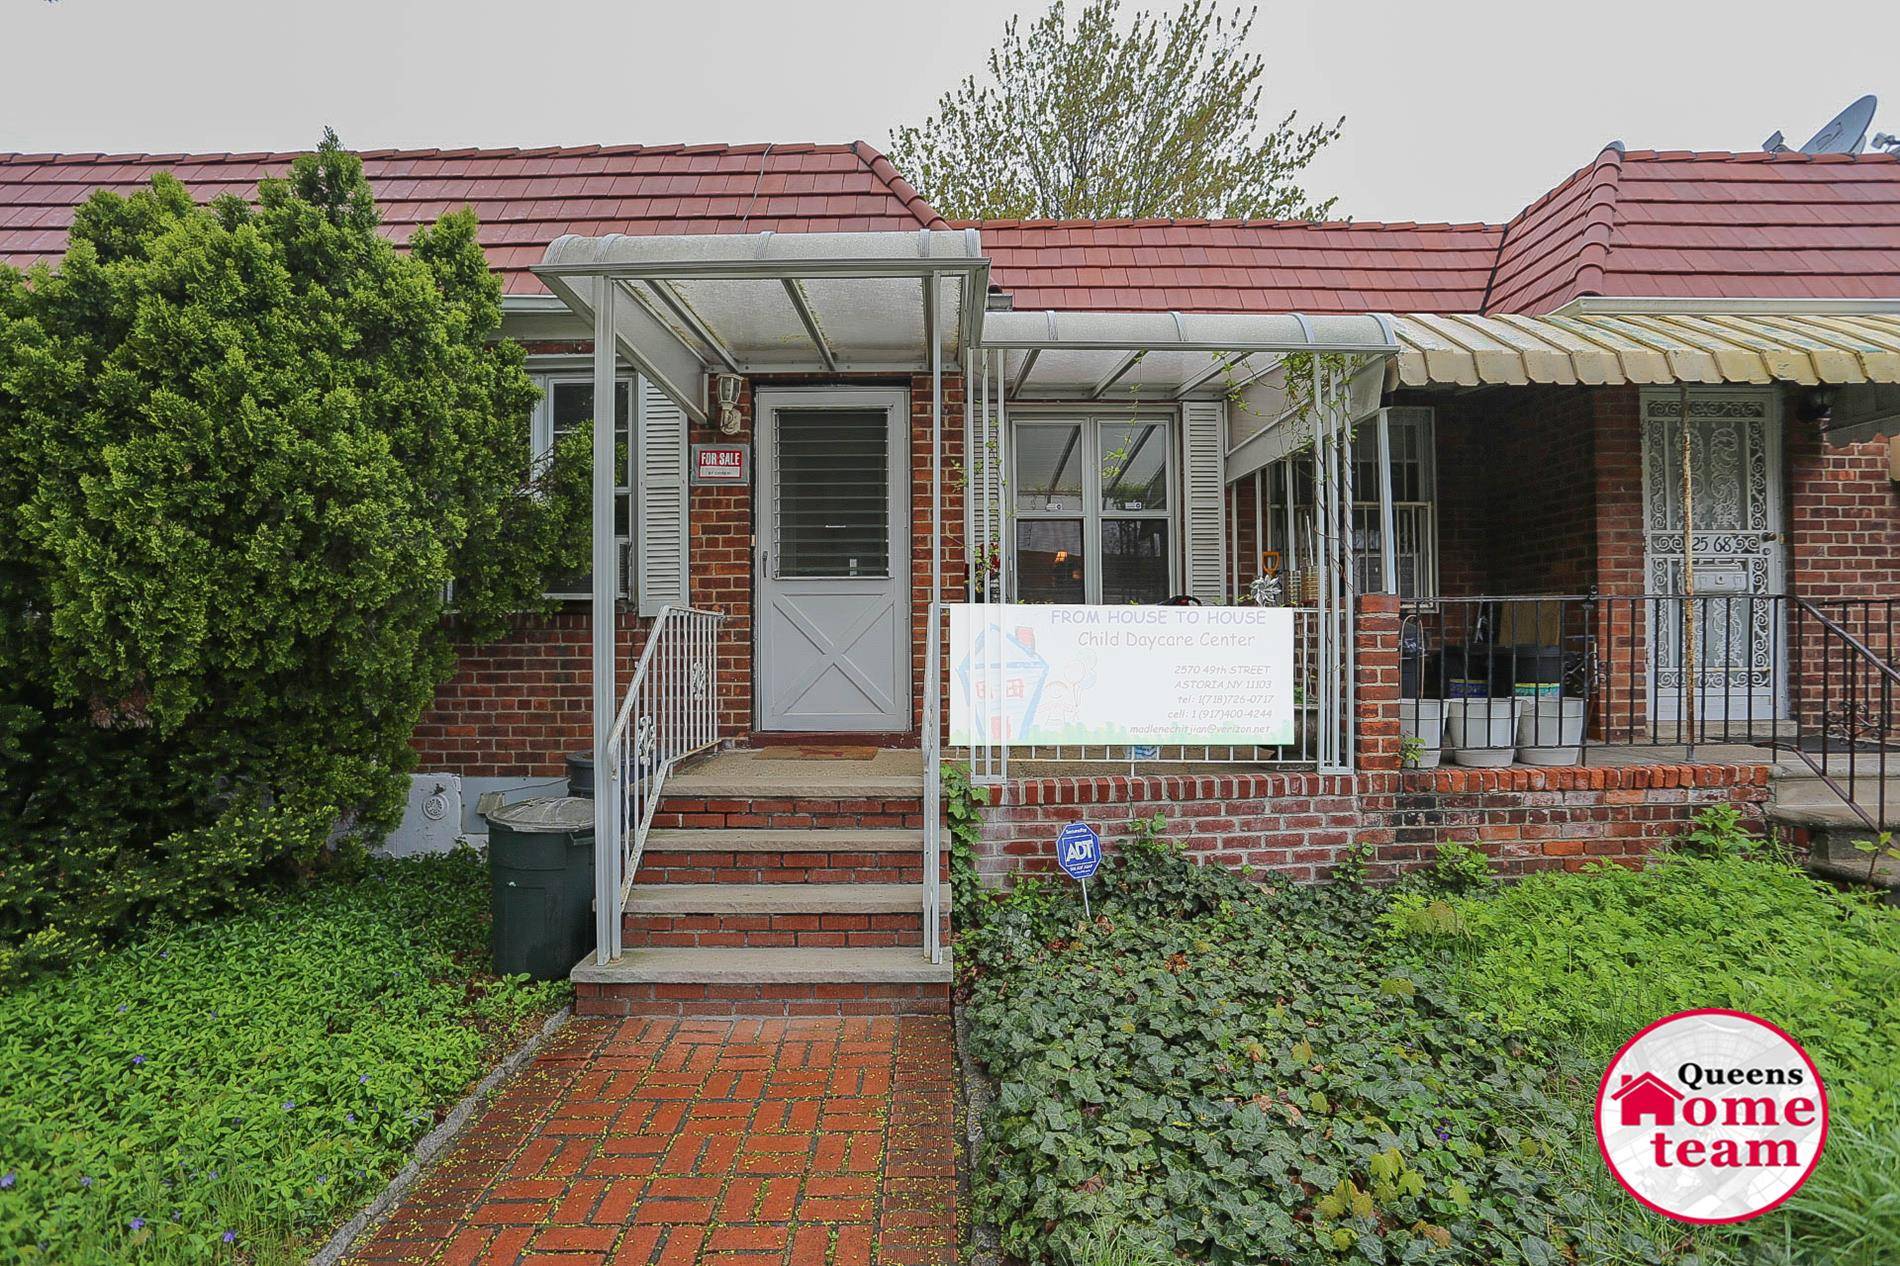 Lovely all brick ranch home with full above grade basement in Astoria, Queens.